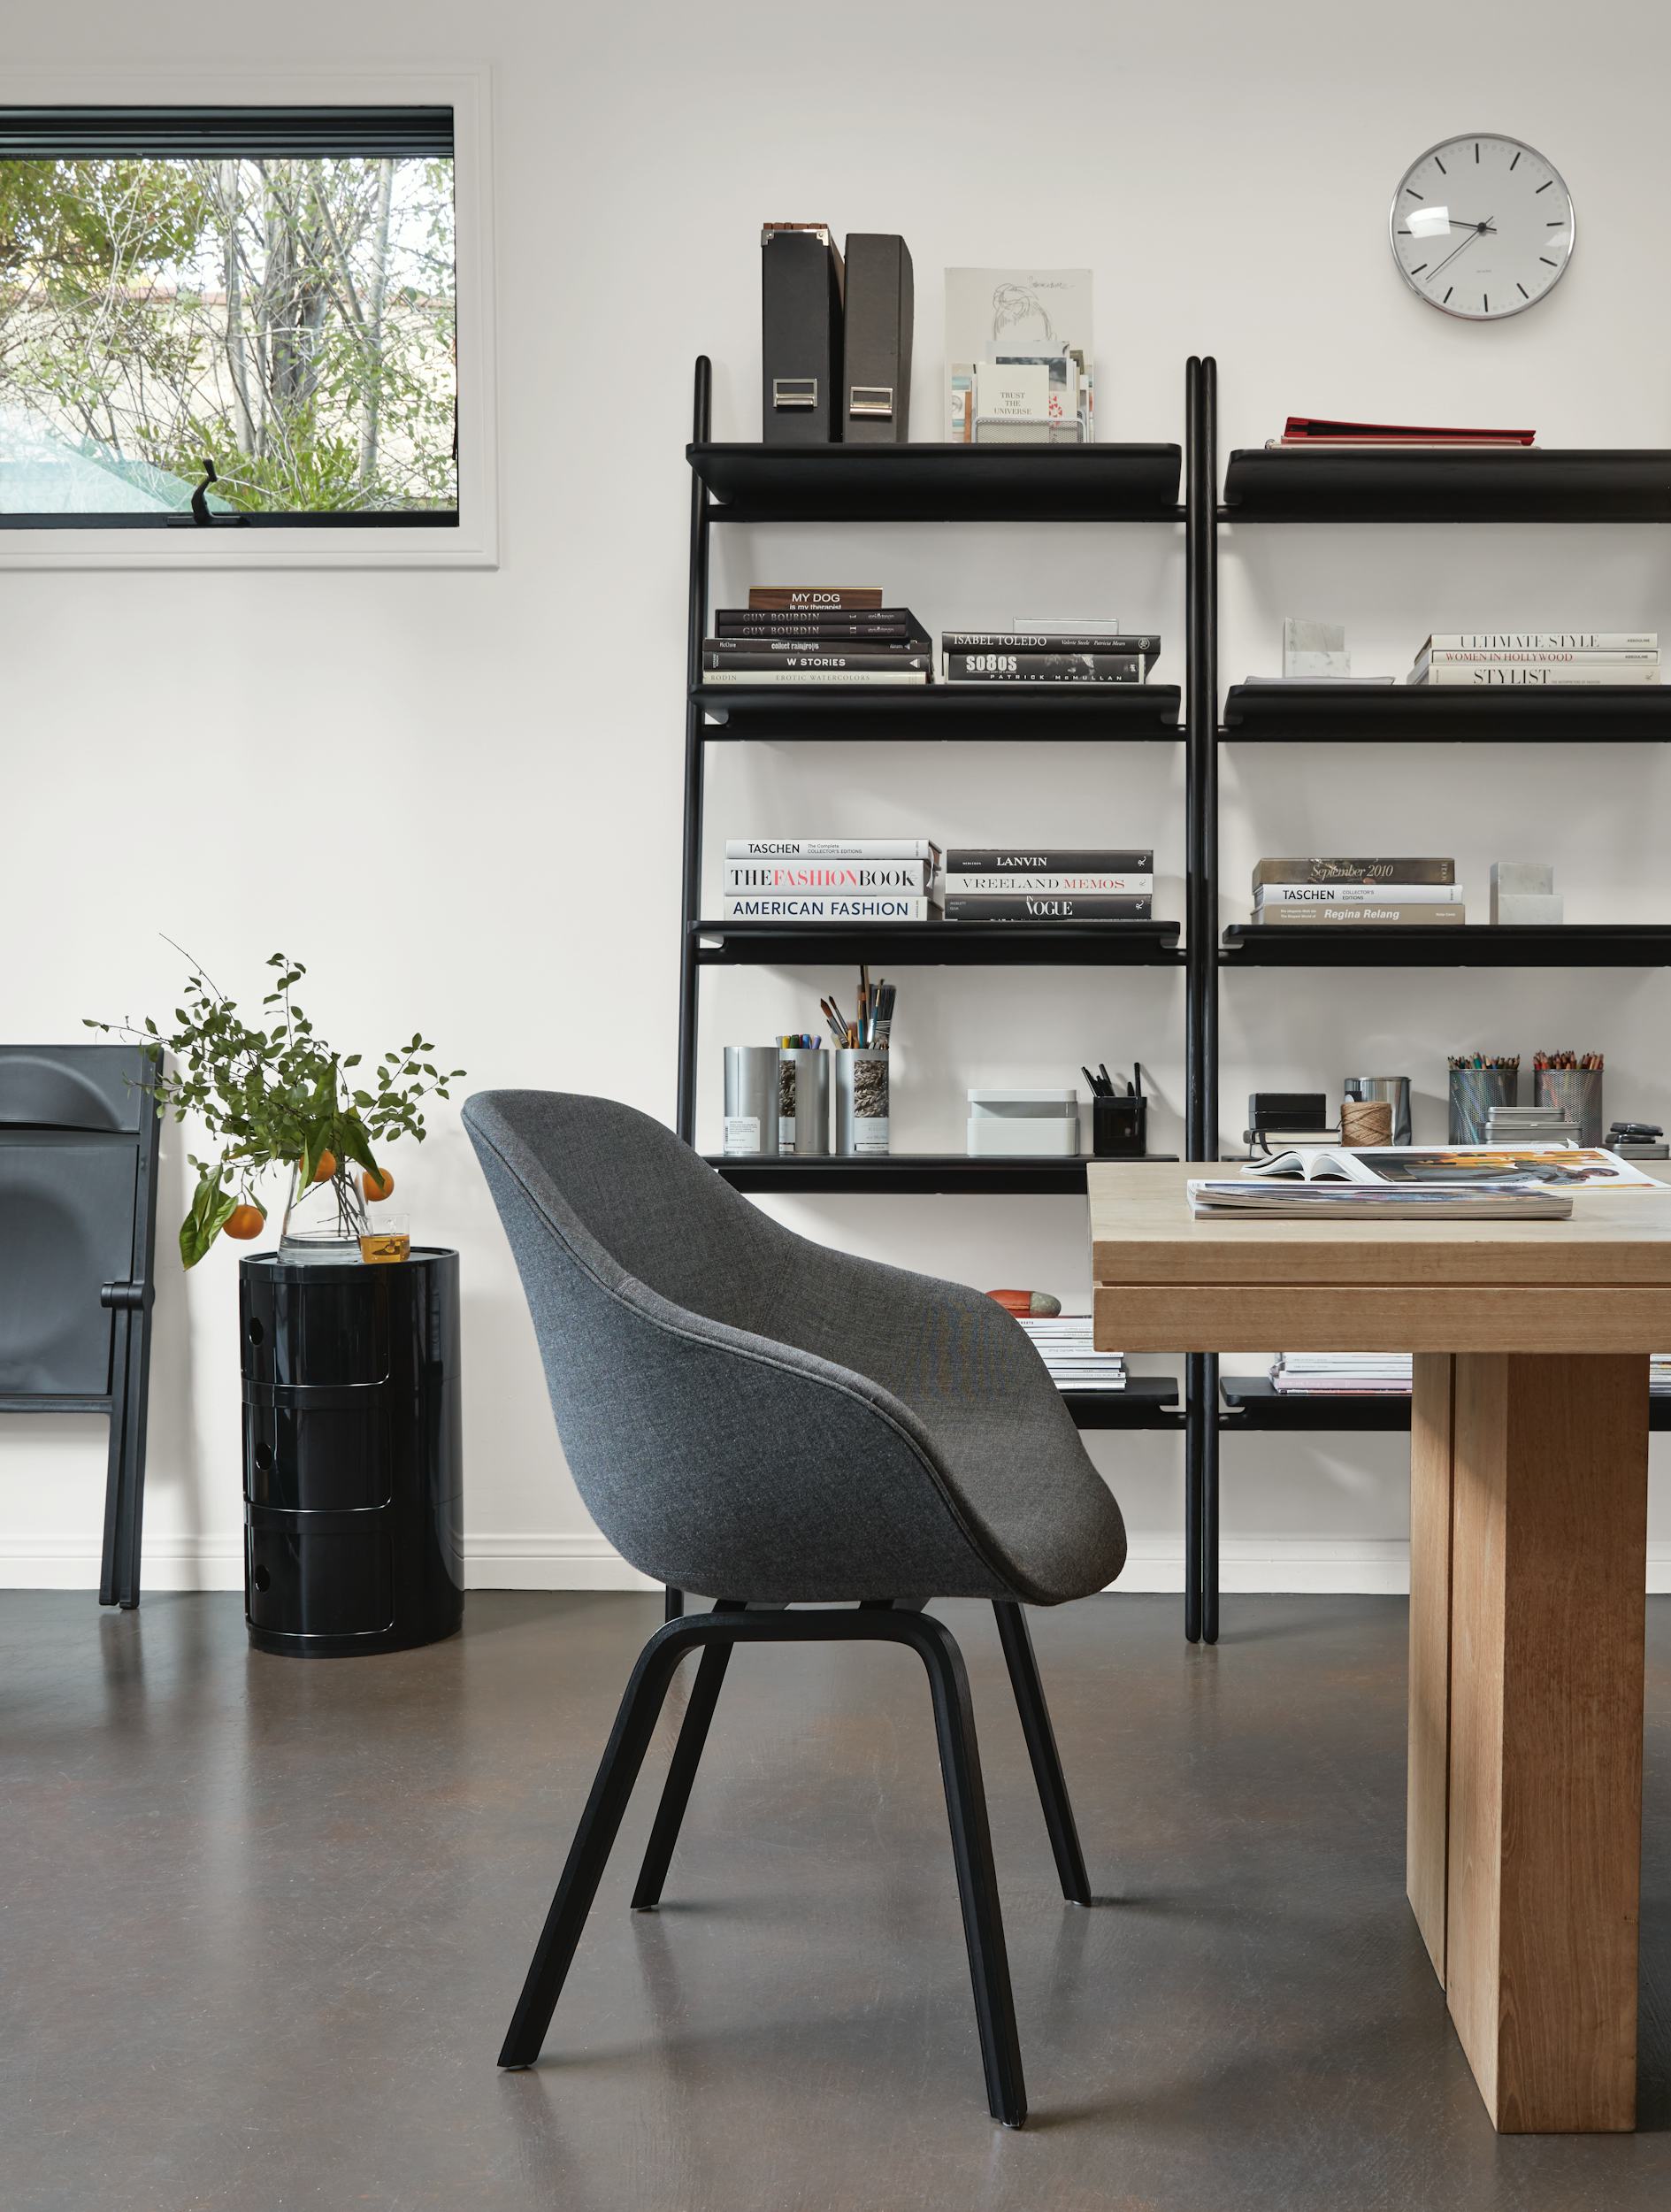 About a Chair 155 Task Chair – Design Within Reach